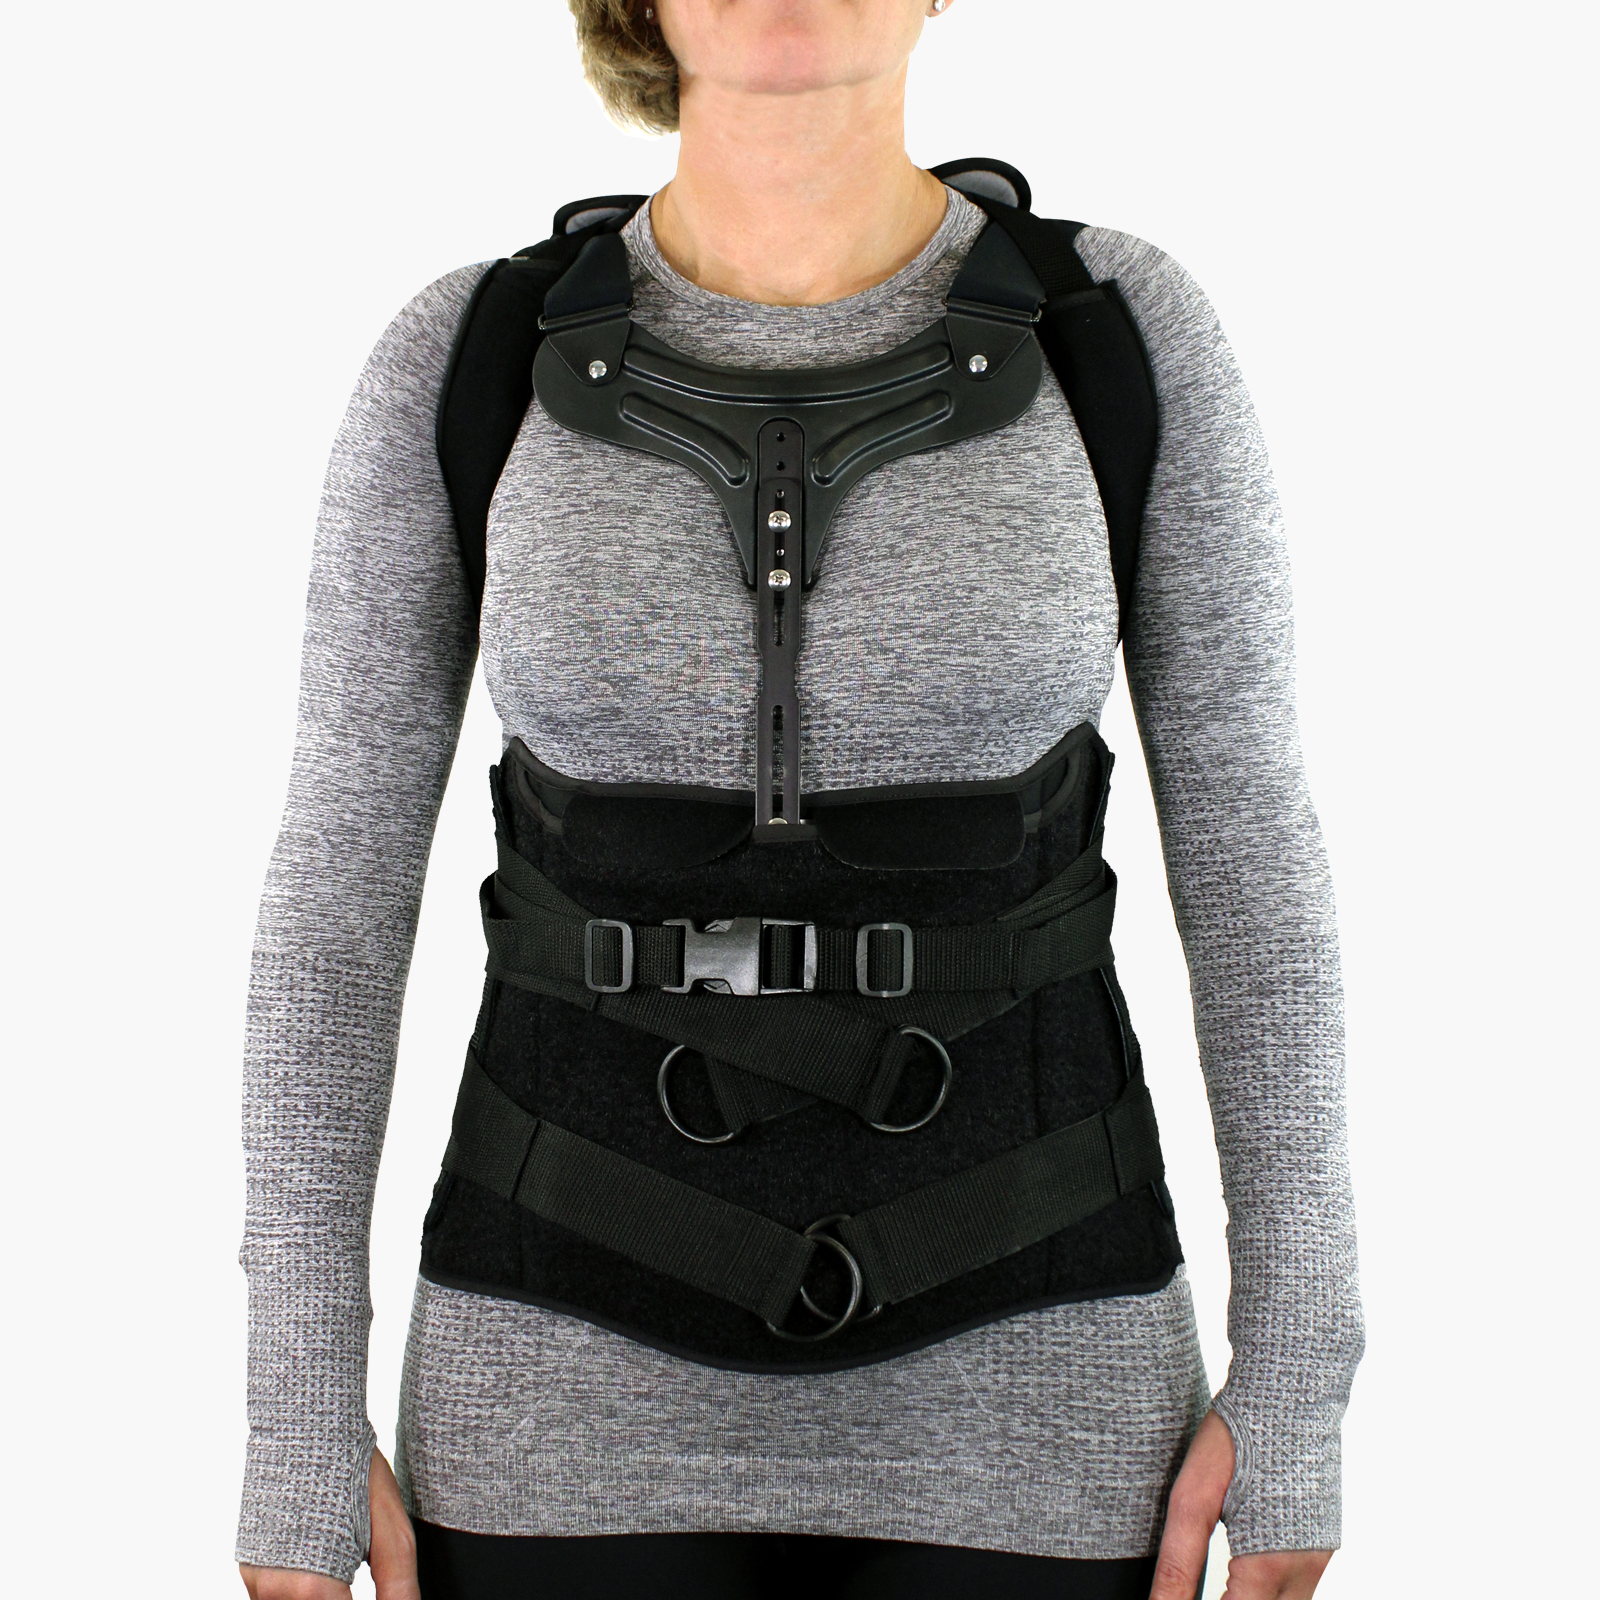 Using Your CTLSO (Spinal Brace) at Home, Treatments, Patients & Families